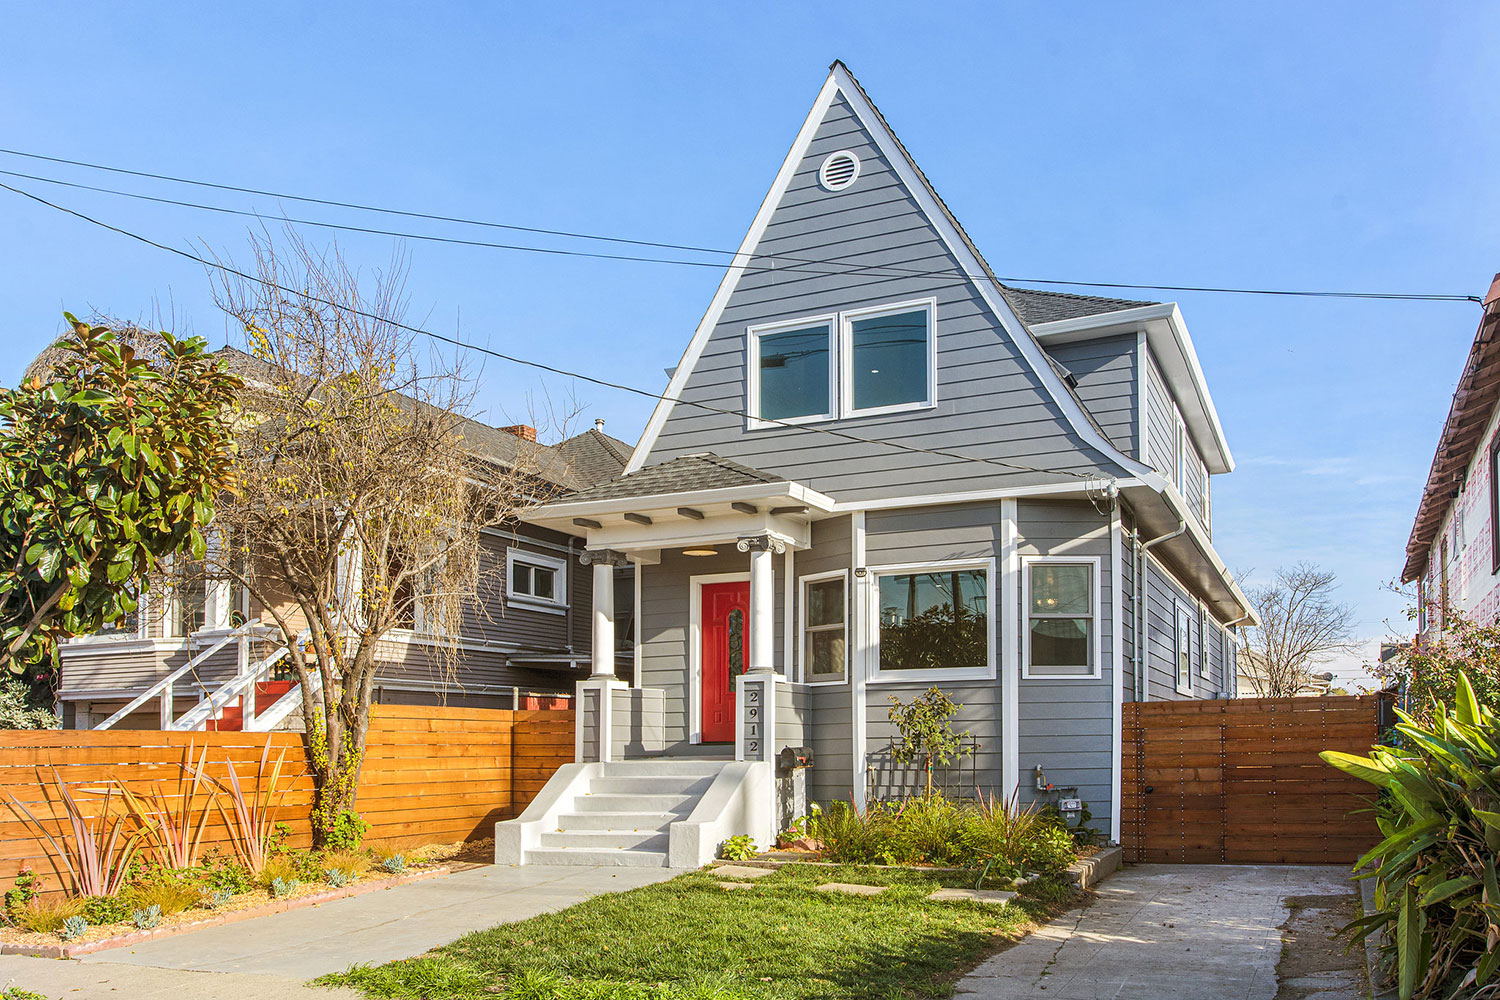 A-frame 2-story house originally built in 1905. Fully renovated in 2020. Victorian architecture period details. Exterior painted gray with white trim. Red entry door.